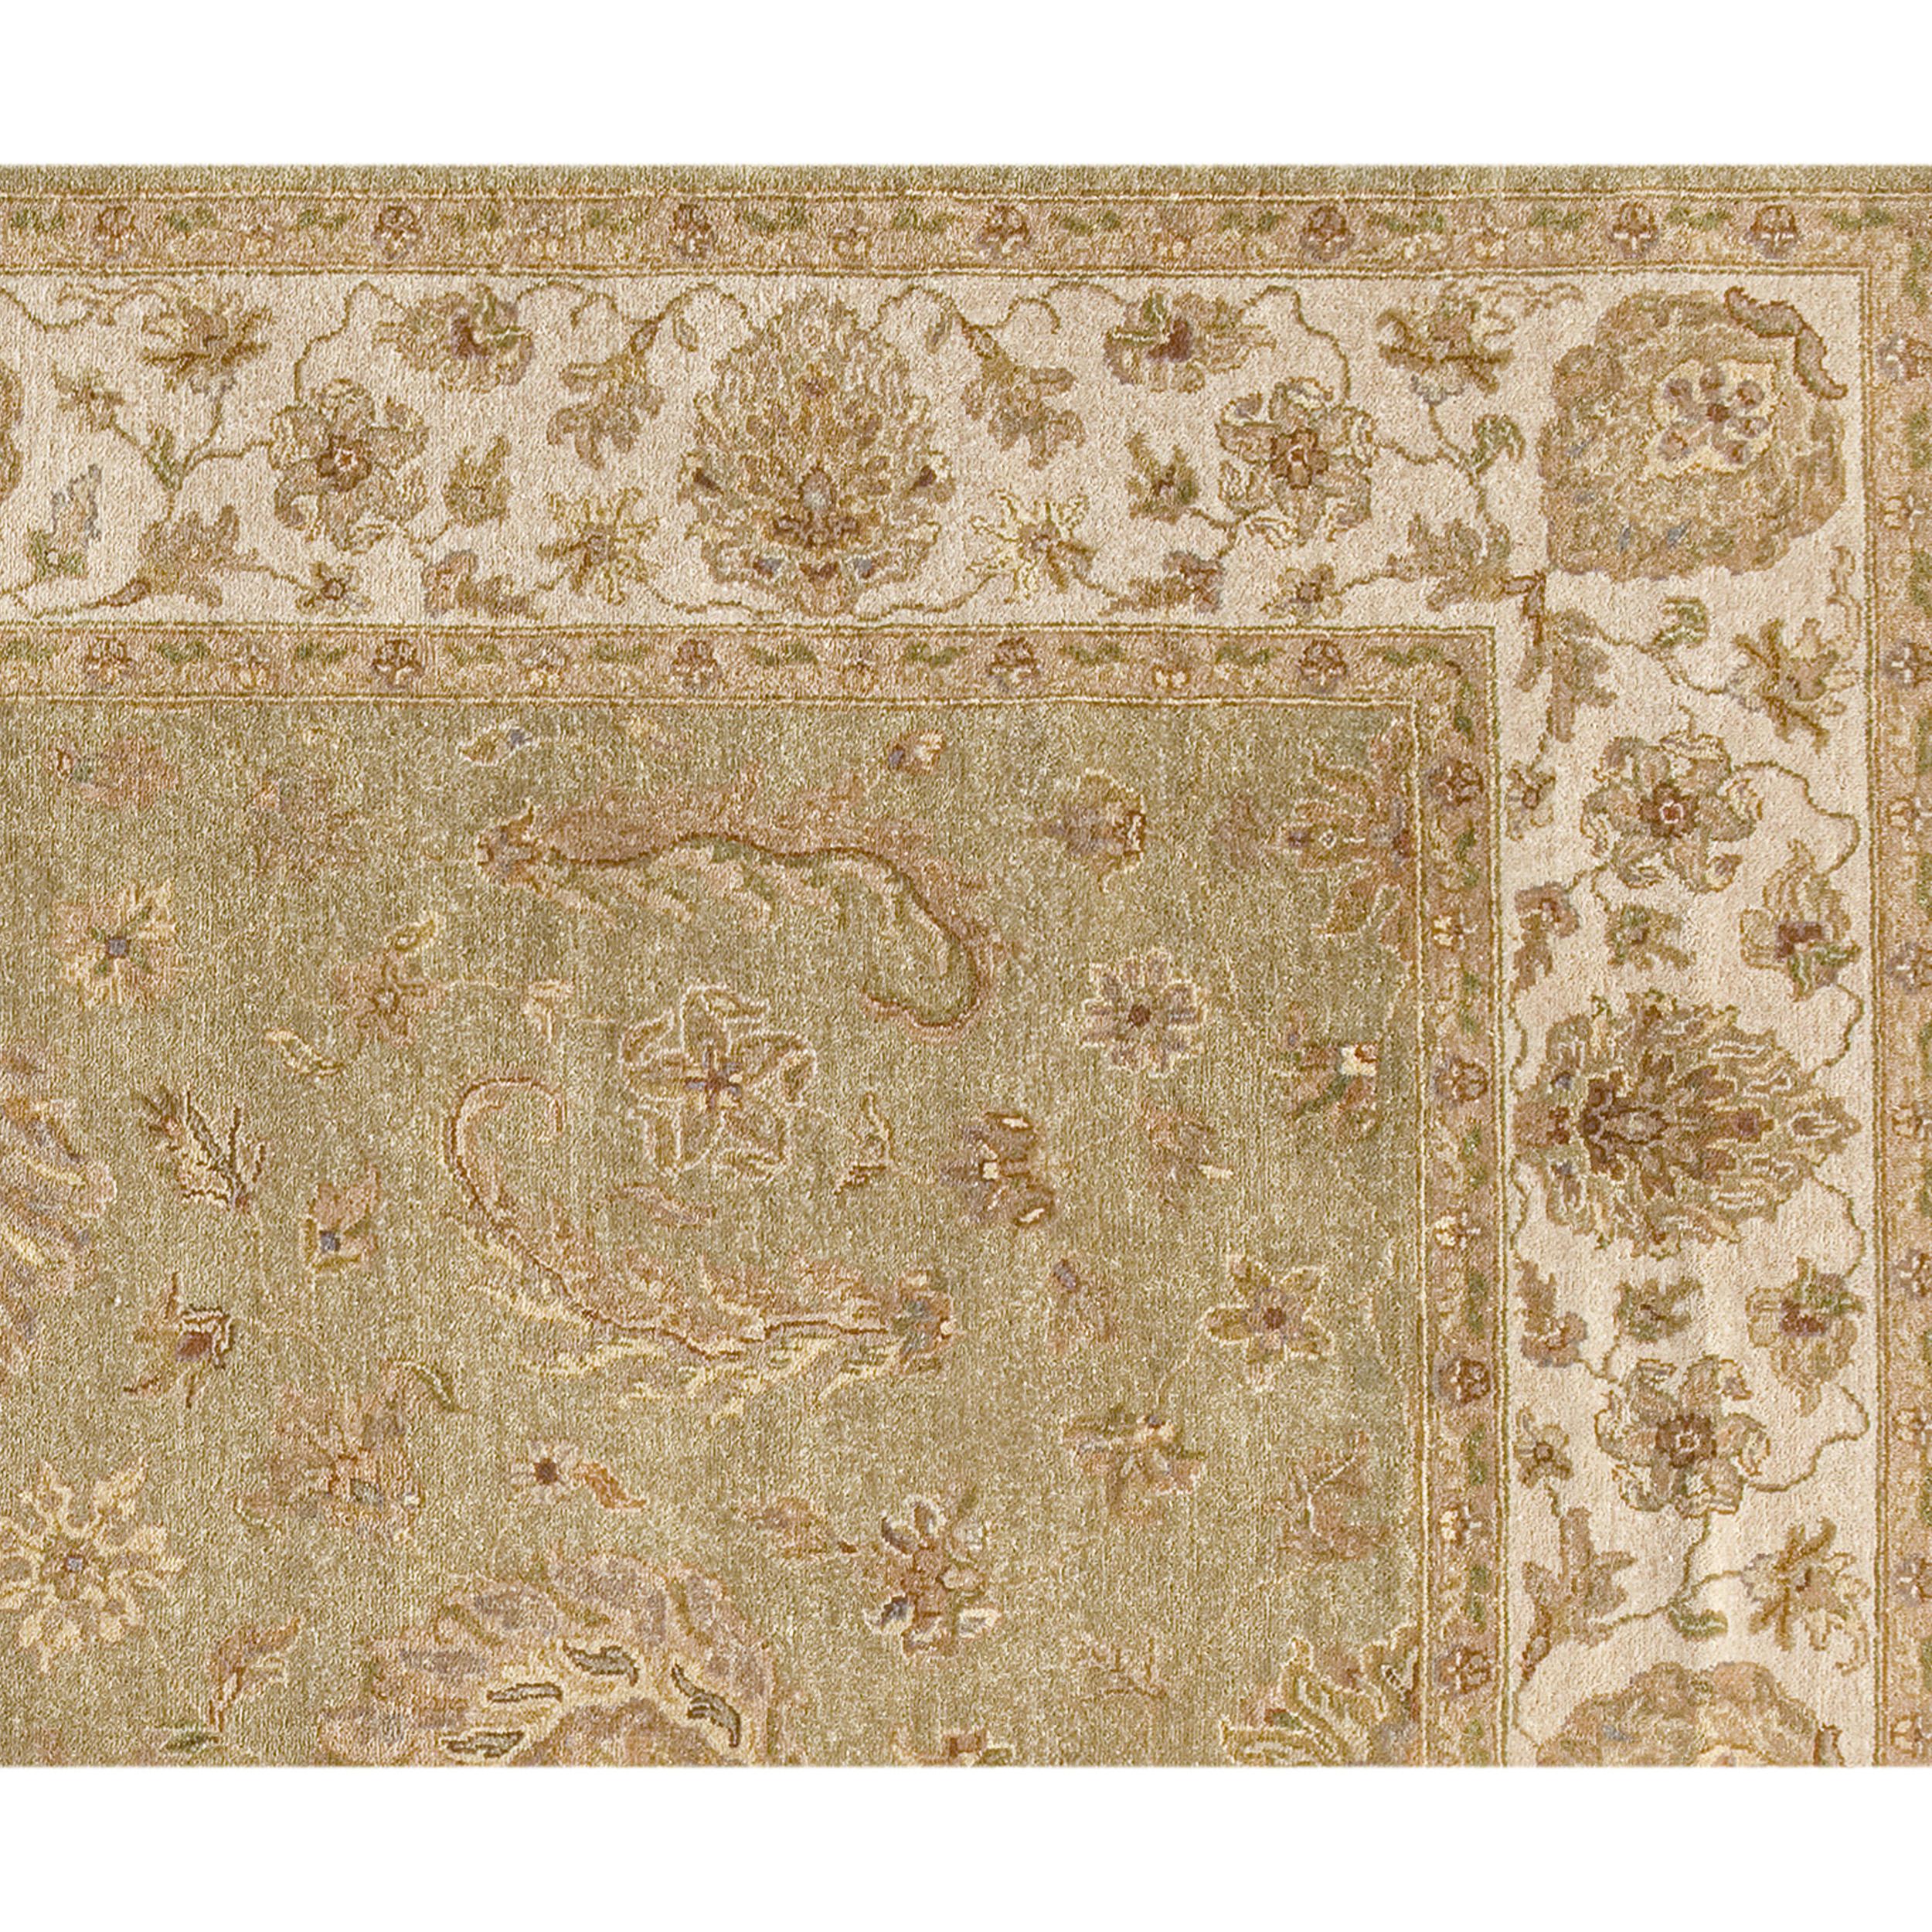 Indian Luxury Traditional Hand-Knotted Amritsar Agra Lt. Green/Ivory 12x15 Rug For Sale